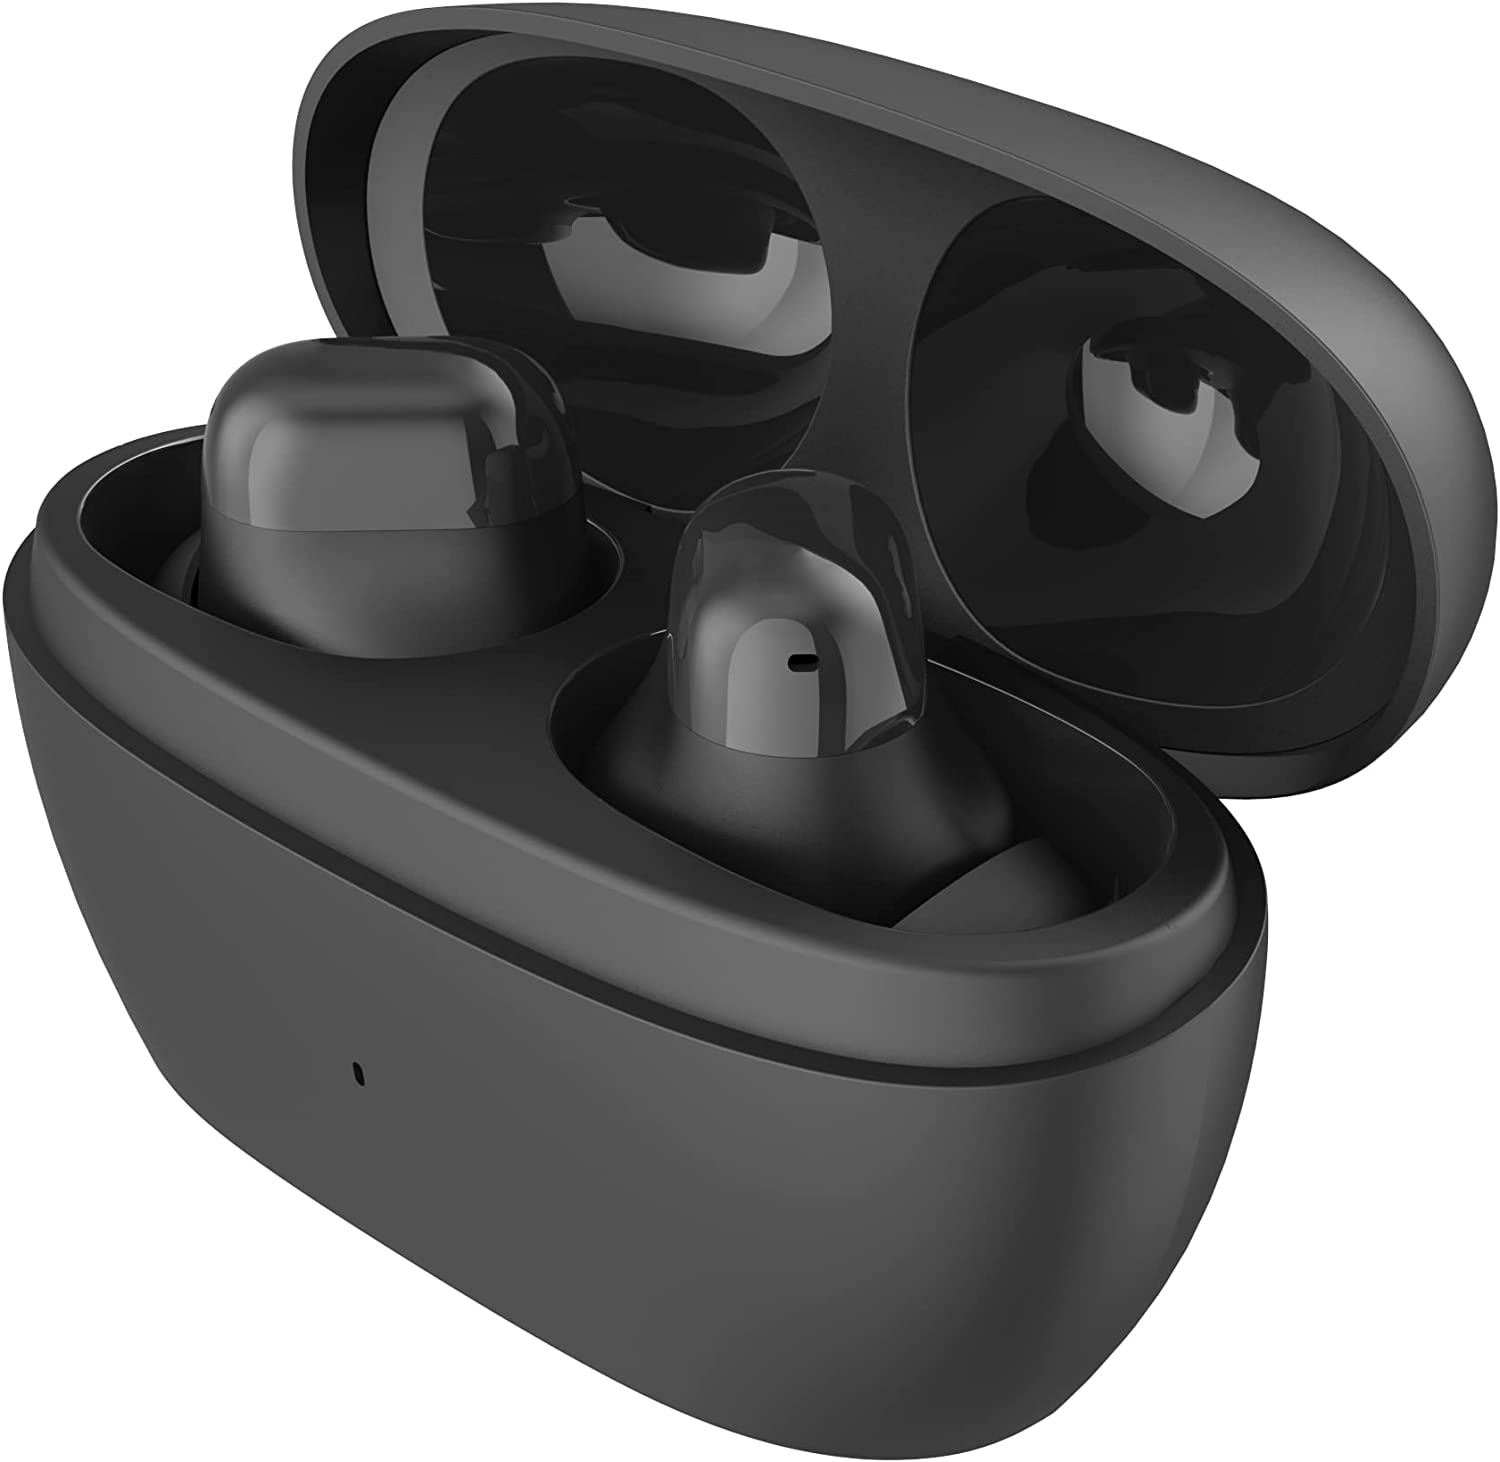 1MORE Earbuds Sale: PistonBuds Pro Wireless Noise Canceling Earbuds $36, Omthing AirFree Bluetooth Wireless Earbuds $20 + Free Shipping